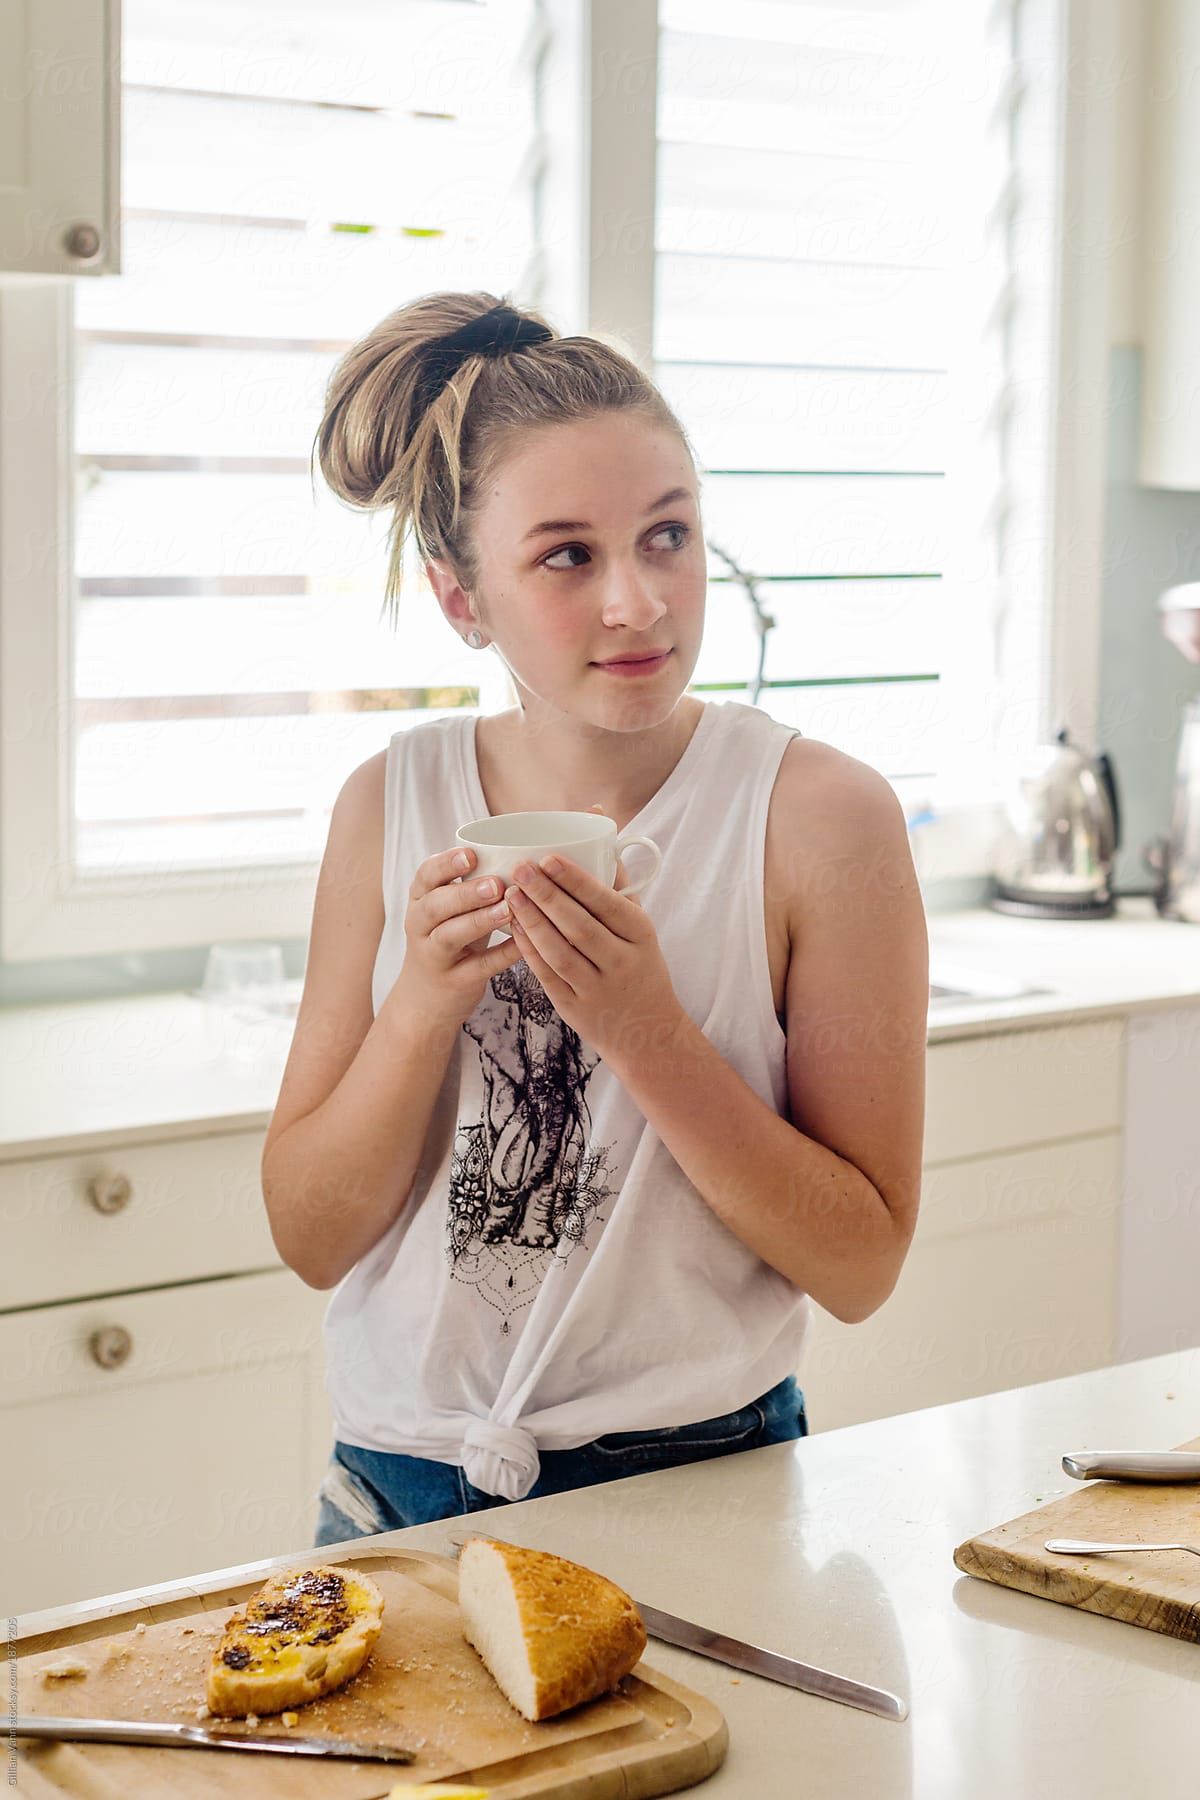 Teen In Kitchen With A Cup Of Tea By Stocksy Contributor Gillian Vann Stocksy